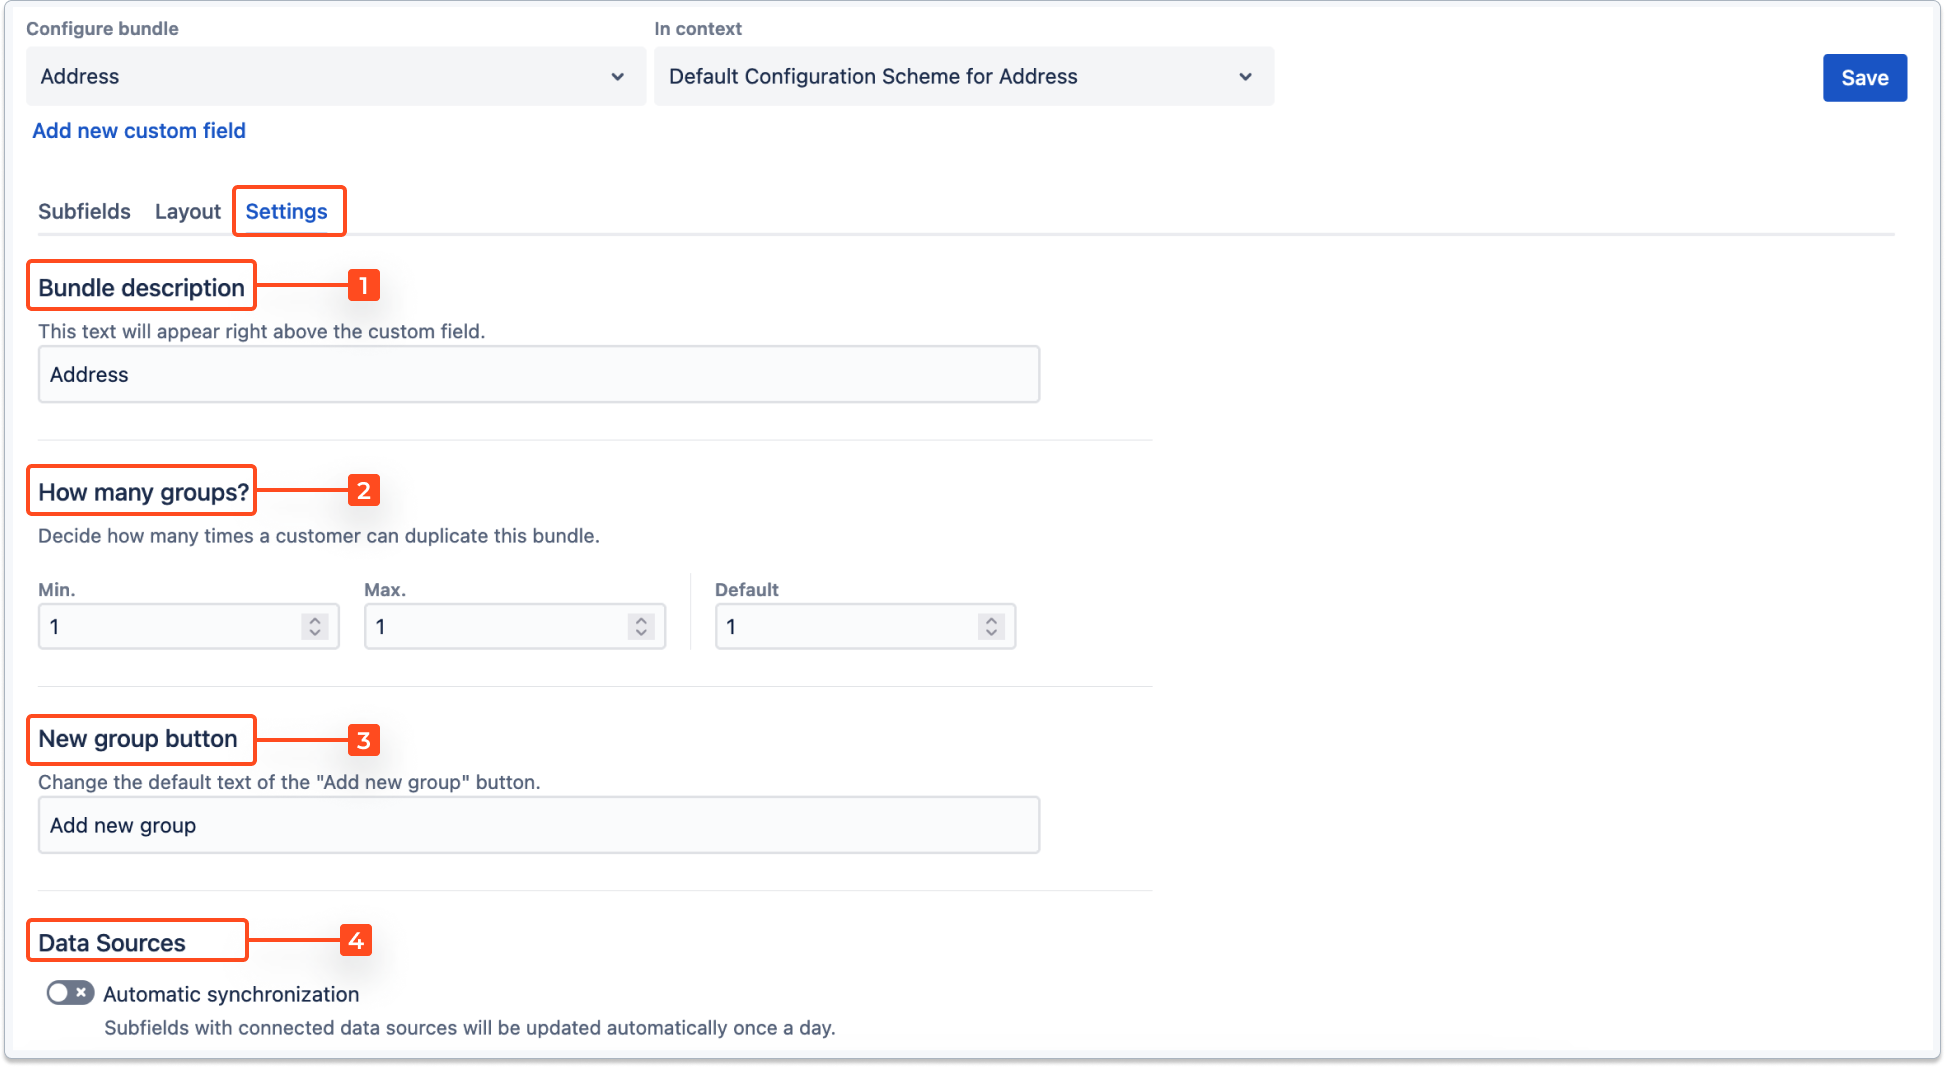 Dynamic Forms for Jira - Bundled Fields Configuration: Settings